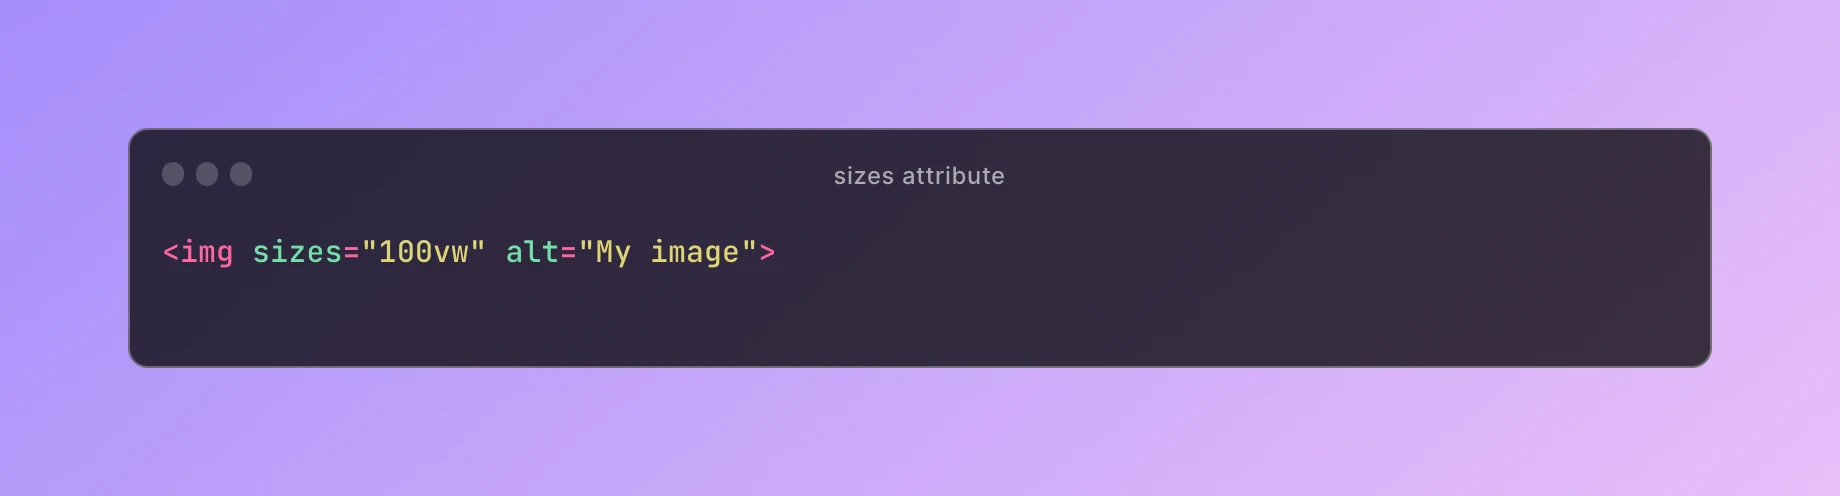 Optimizing images with sizes attribute